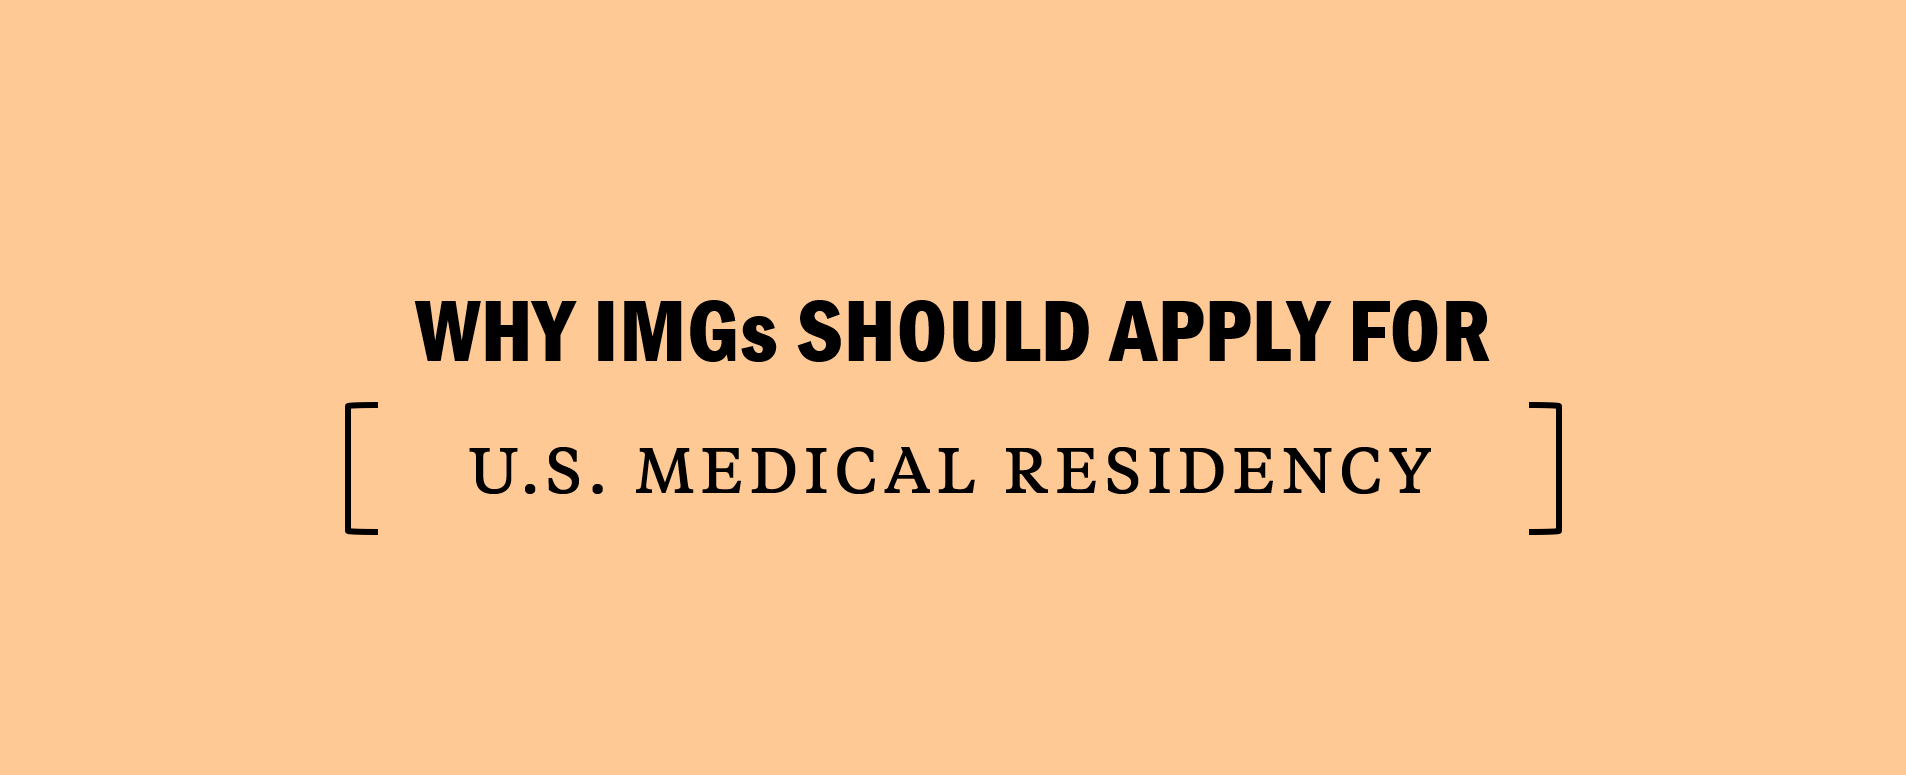 why imgs should appy for us medical residency